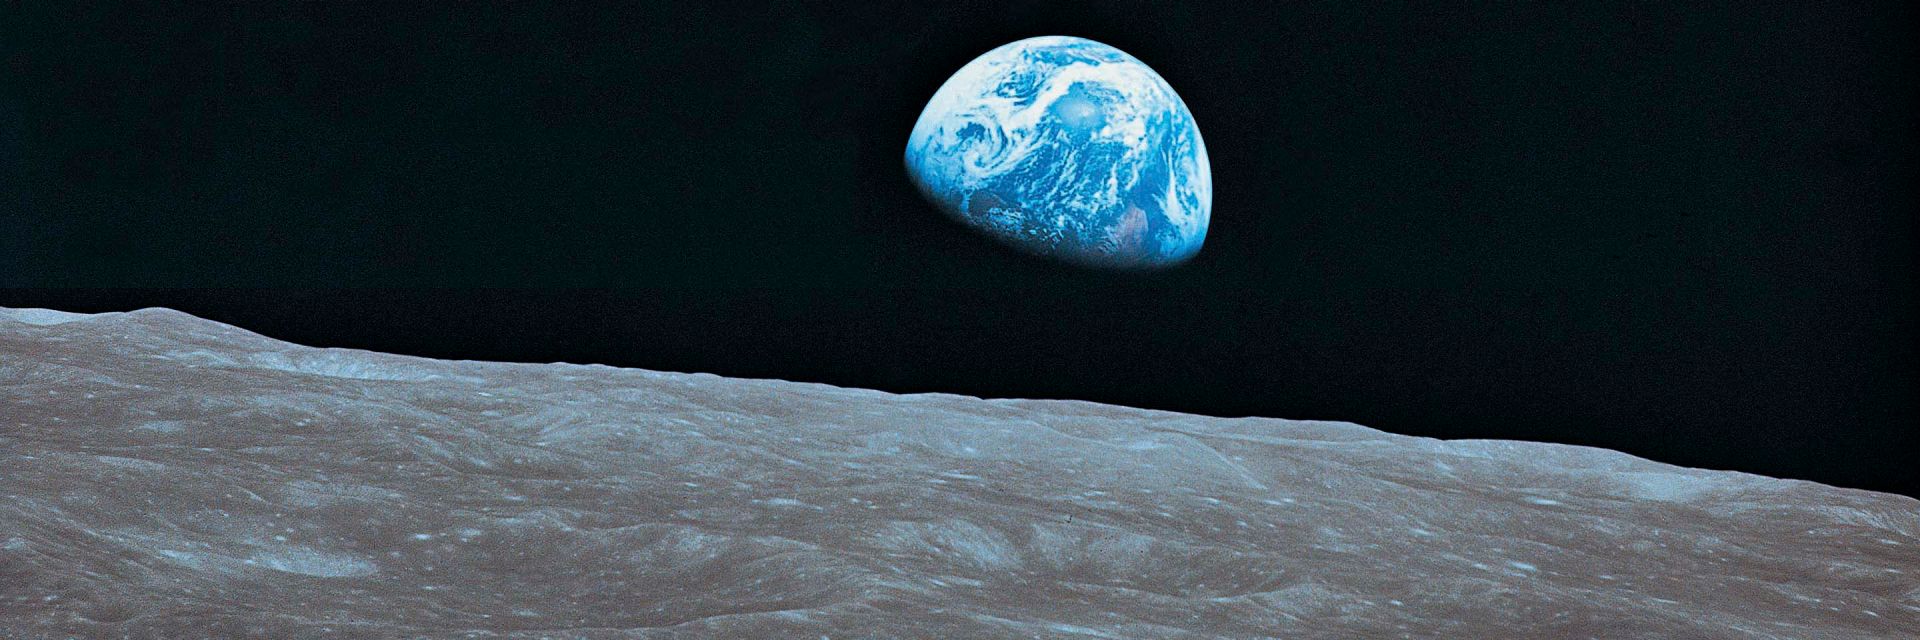 An Earthrise moment: the end of the carbon age